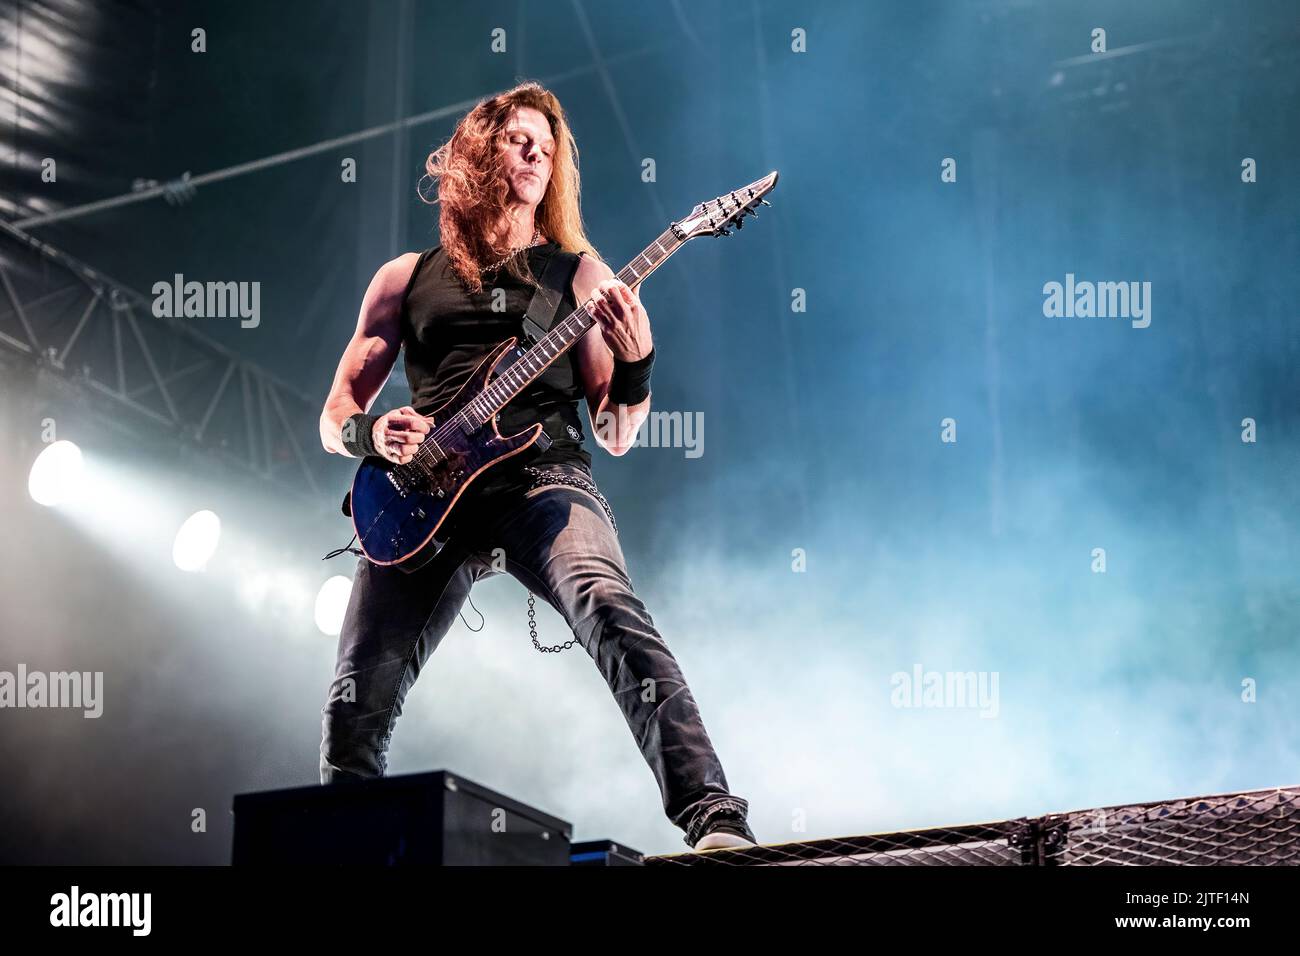 Solvesborg, Sweden. 10th, June 2022. The Swedish heavy metal band In Flames performs a live concert during the Swedish music festival Sweden Rock Festival 2022 in Solvesborg. Here guitarist Chris Broderick is seen live on stage. (Photo credit: Gonzales Photo - Terje Dokken). Stock Photo